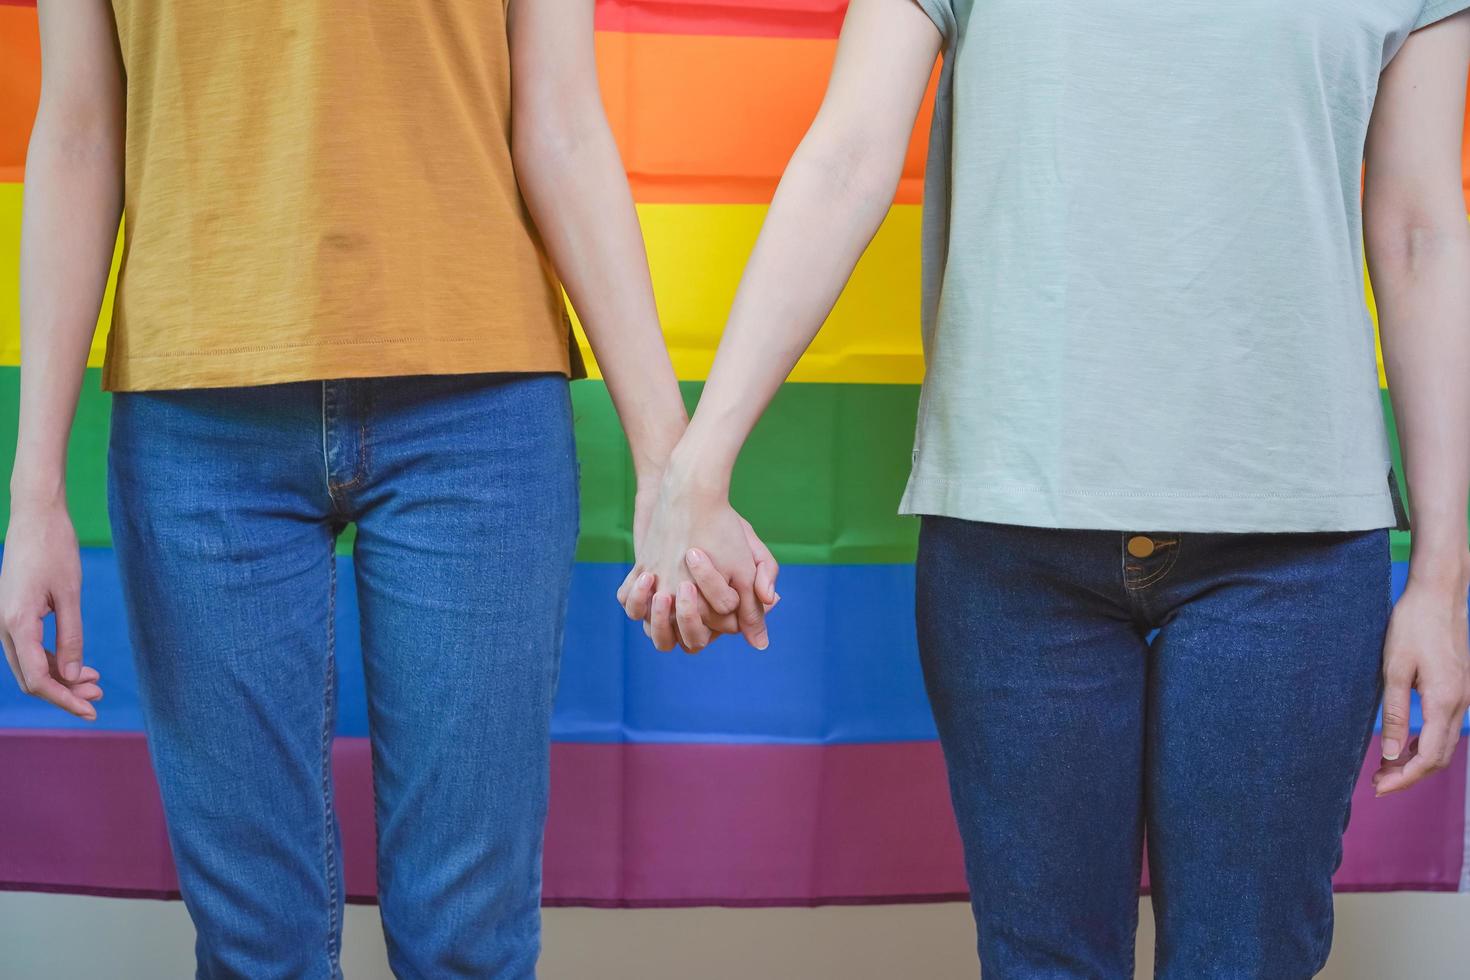 Happy lesbian, beautiful asian young two women, girl gay or lgbt, lgbtq couple love moment spending good time, stand together holding hands in front of pride rainbow flag symbol on isolated background photo